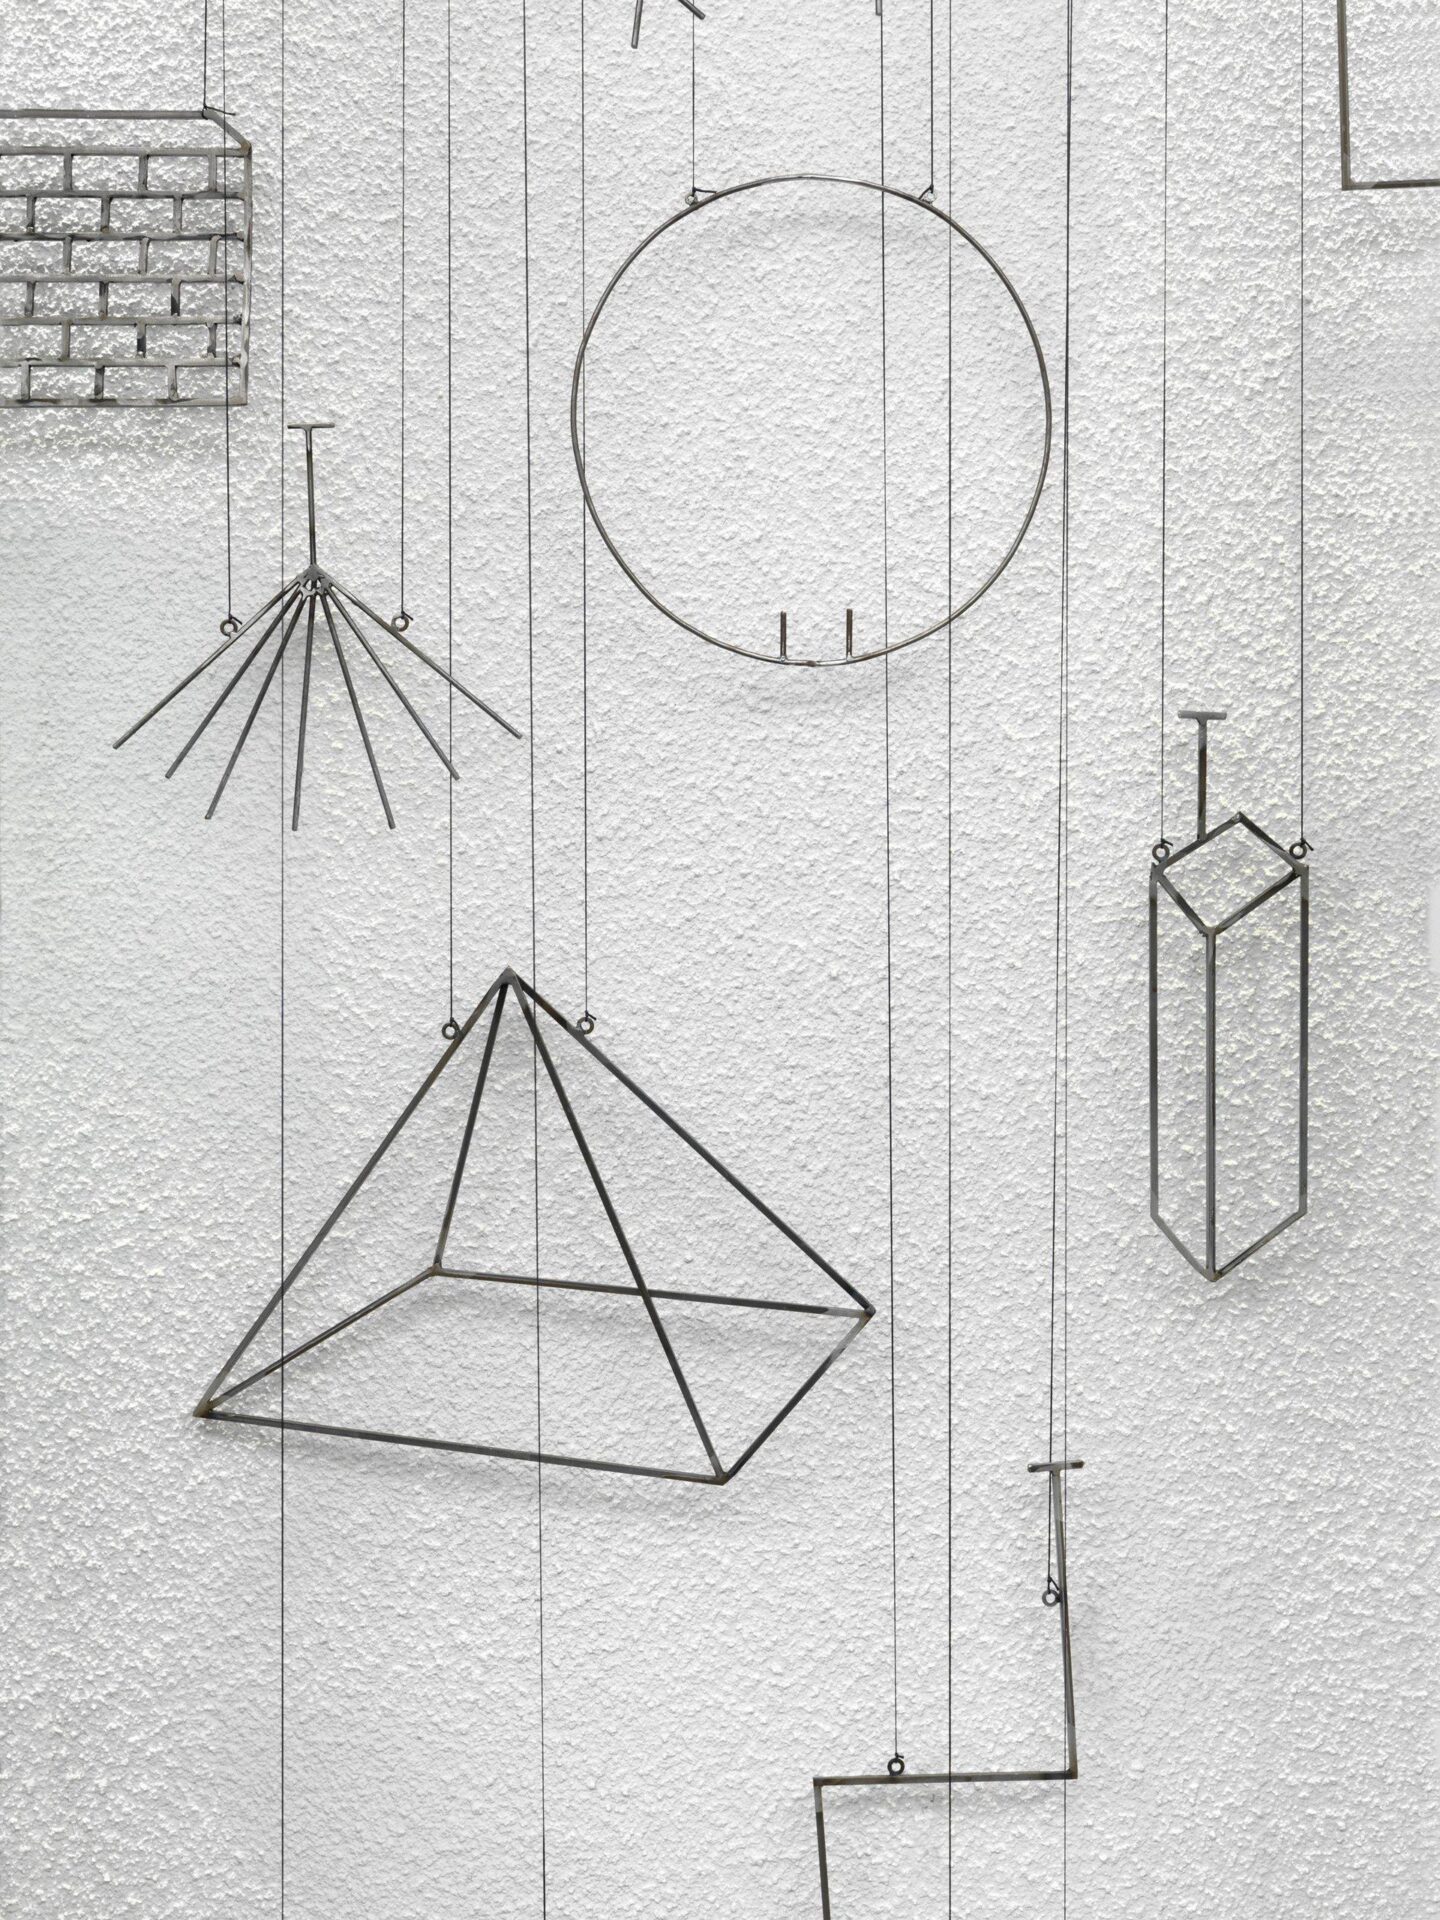 Eva Kot'átková, Psychological Theatre, Head of Karel, A Boy, Who Communicates through Signs and Simple Drawings, 2014, Detail